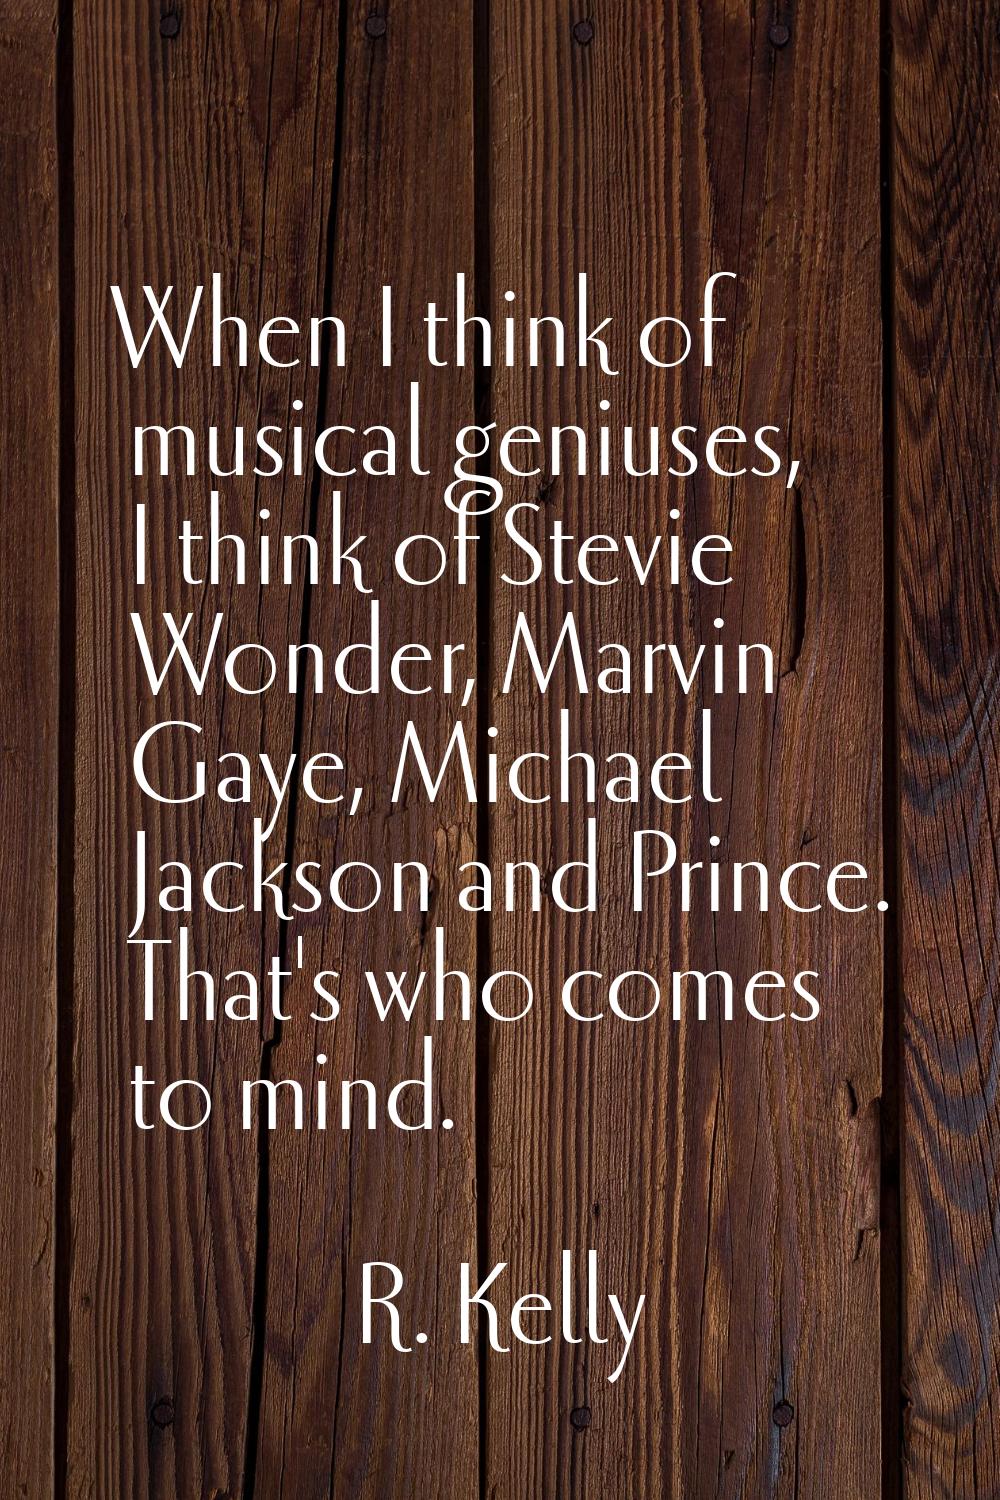 When I think of musical geniuses, I think of Stevie Wonder, Marvin Gaye, Michael Jackson and Prince